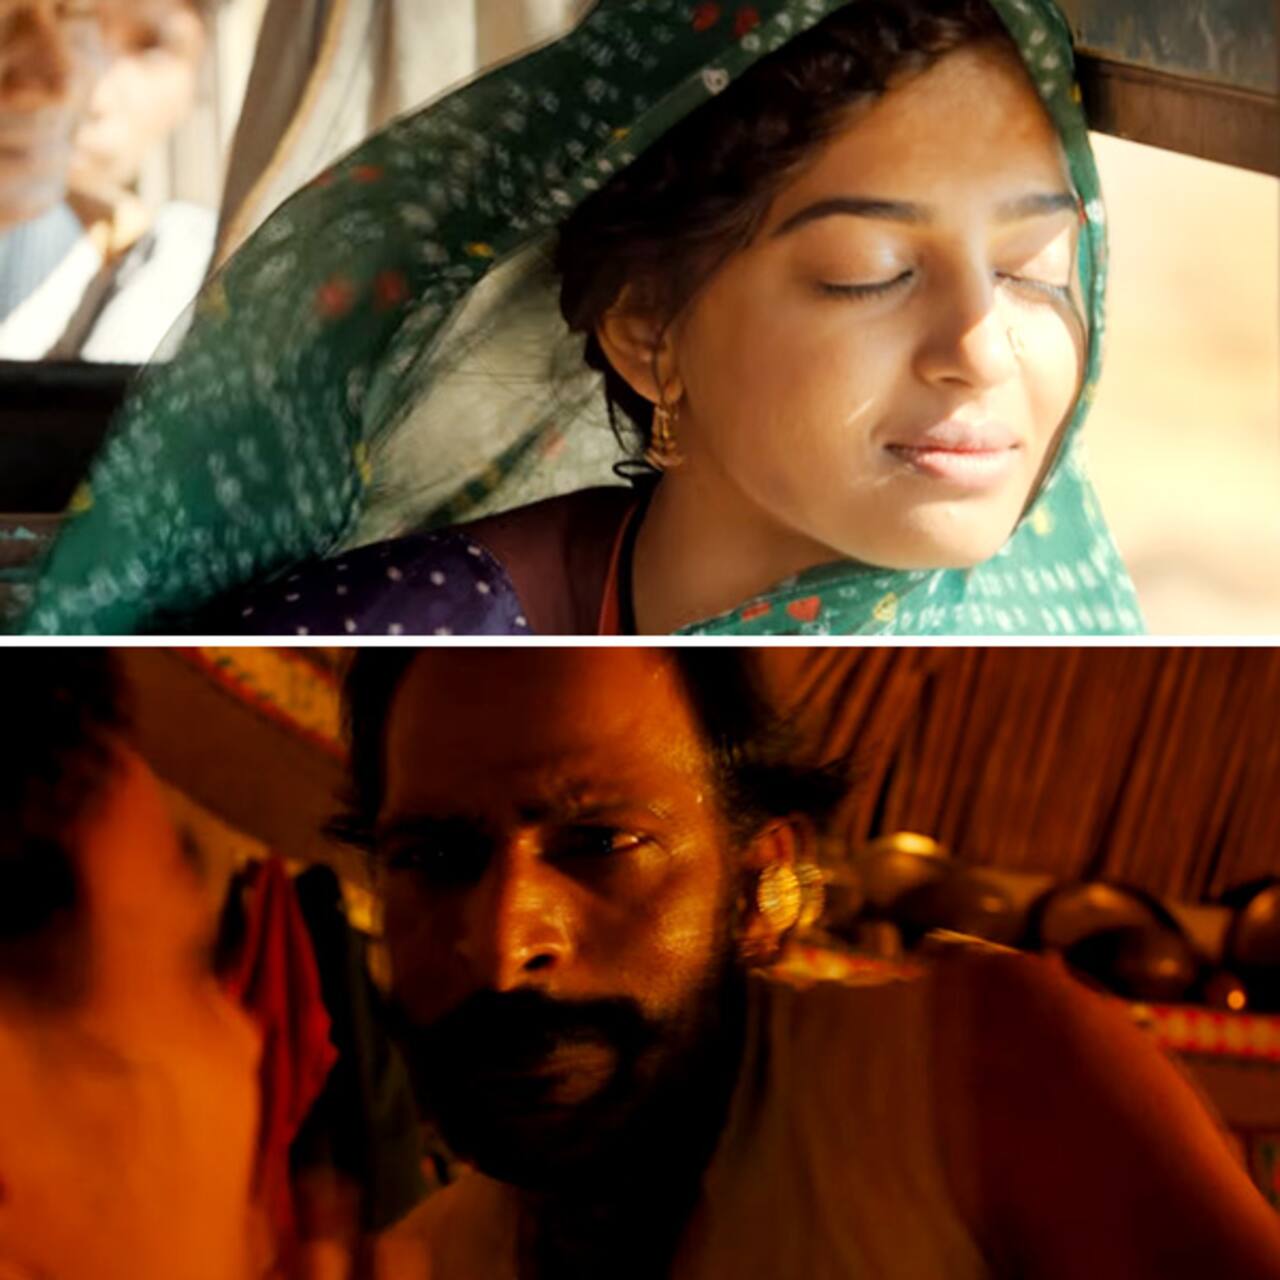 Parched will also show the life of woman who cannot bear children